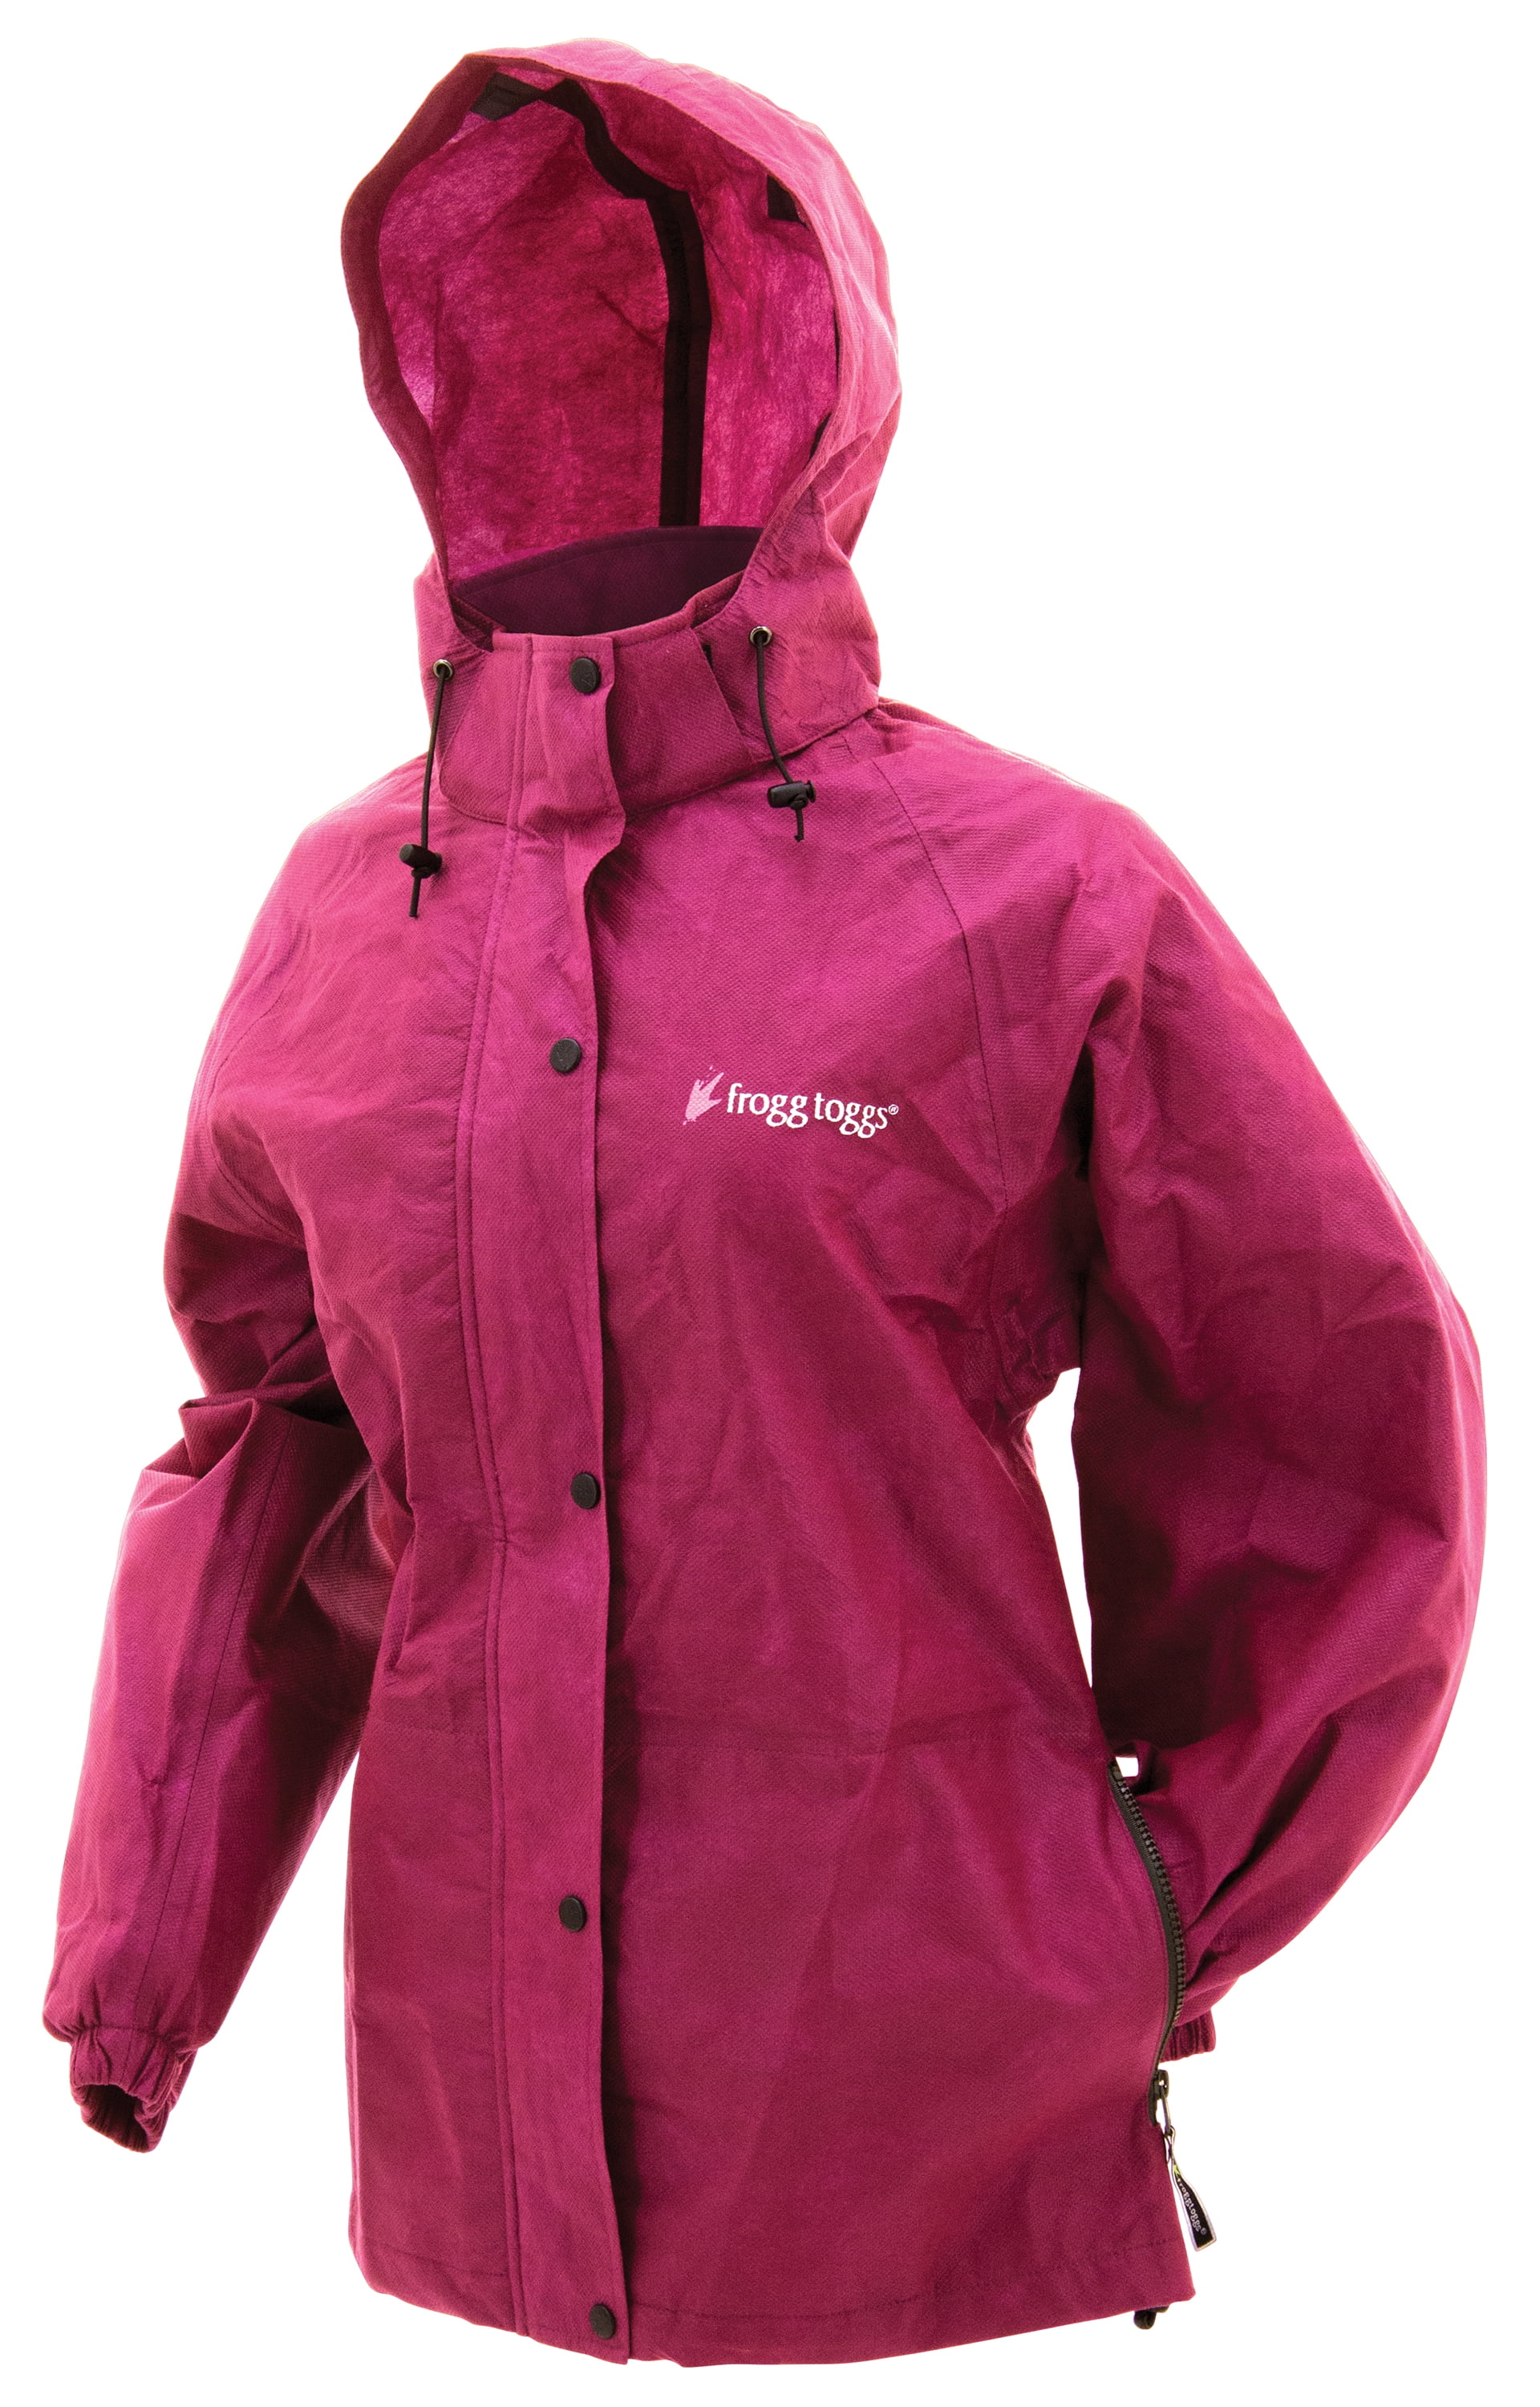 FROGG TOGGS Mens Classic Pro Action Waterproof Breathable Rain Jacket 